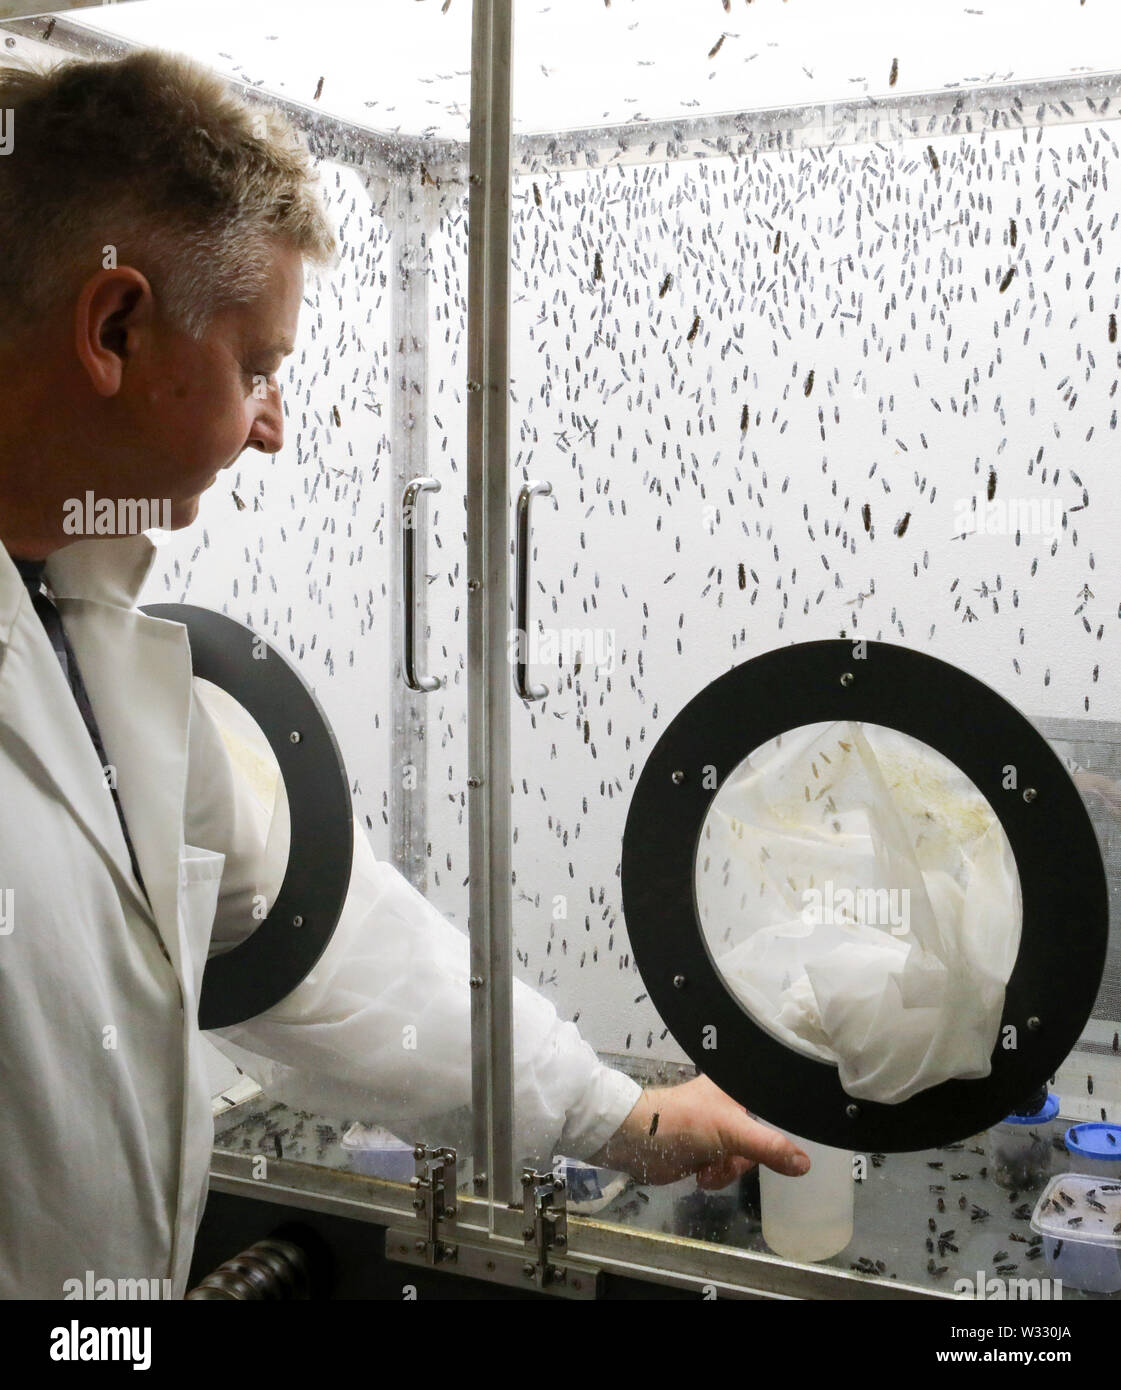 Dummerstorf, Germany. 11th July, 2019. At the Leibniz Institute for Farm Animal Biology (FBN), Manfred Mielenz, biologist, handles the first soldier fly colony in a fly cage. The scientists are investigating whether and how the up to two centimetre large black soldier flies and their protein-rich larvae can be used as a high-quality protein source for animal feed. Credit: Bernd Wüstneck/dpa-Zentralbild/dpa/Alamy Live News Stock Photo